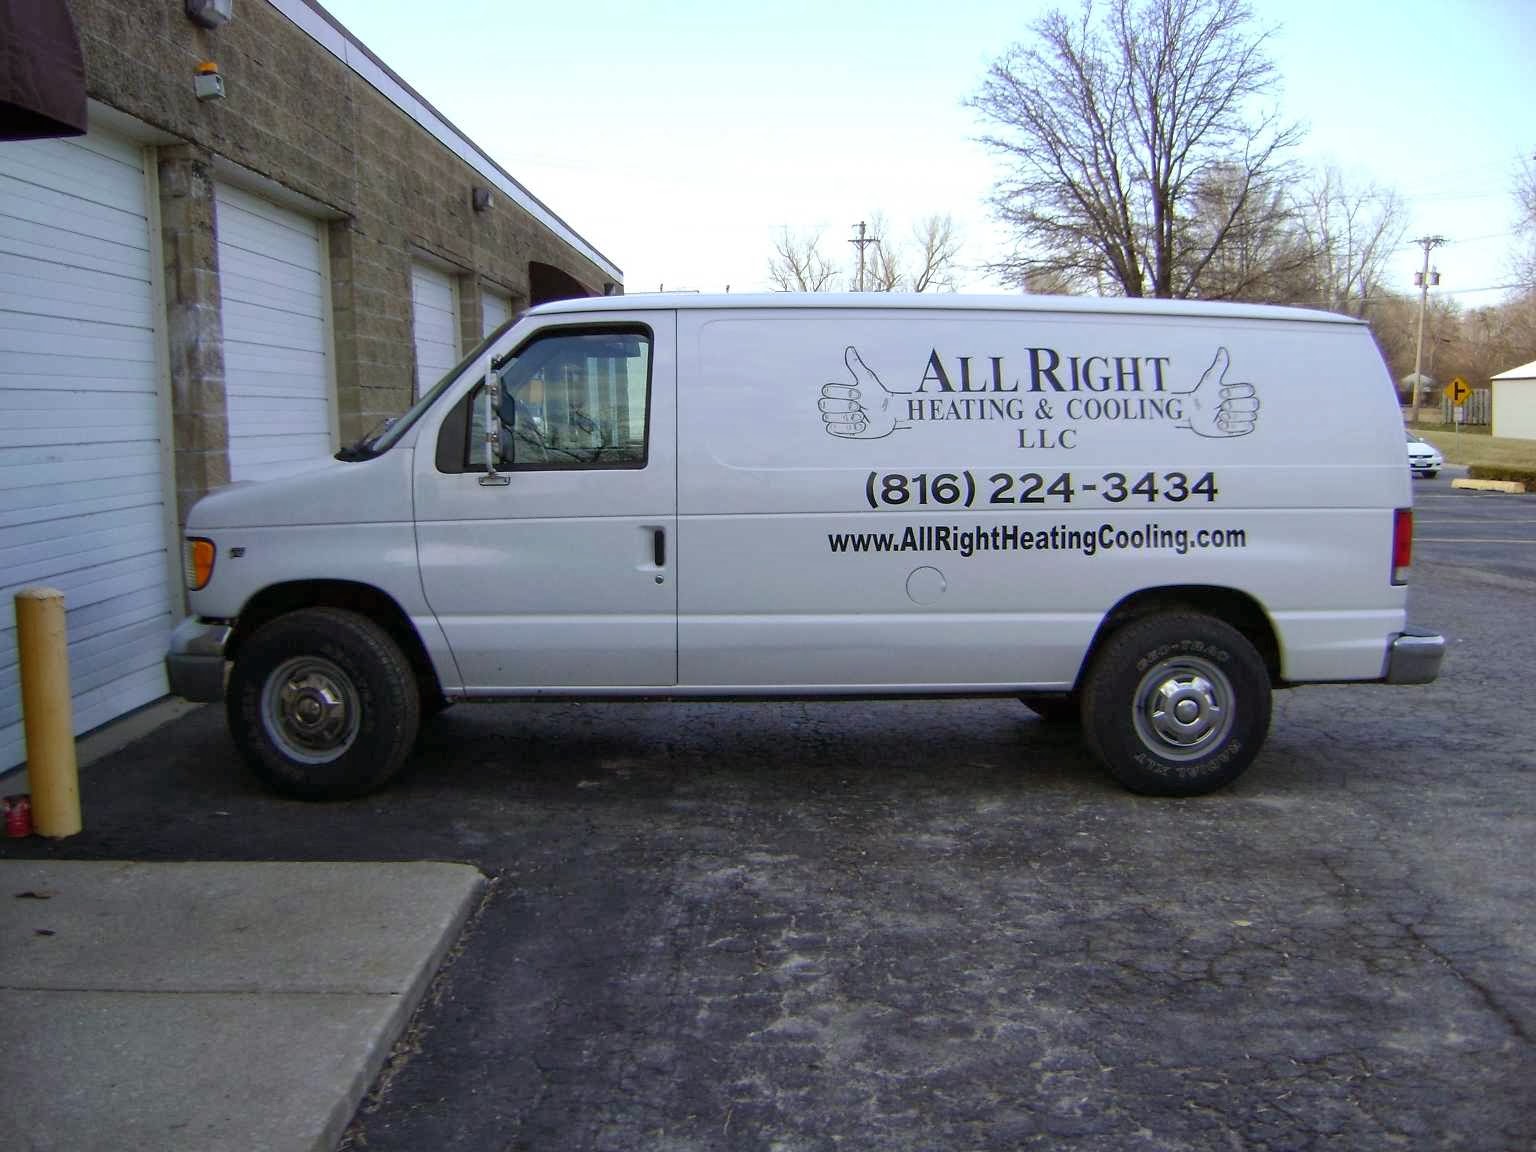 All Right Heating & Cooling, LLC